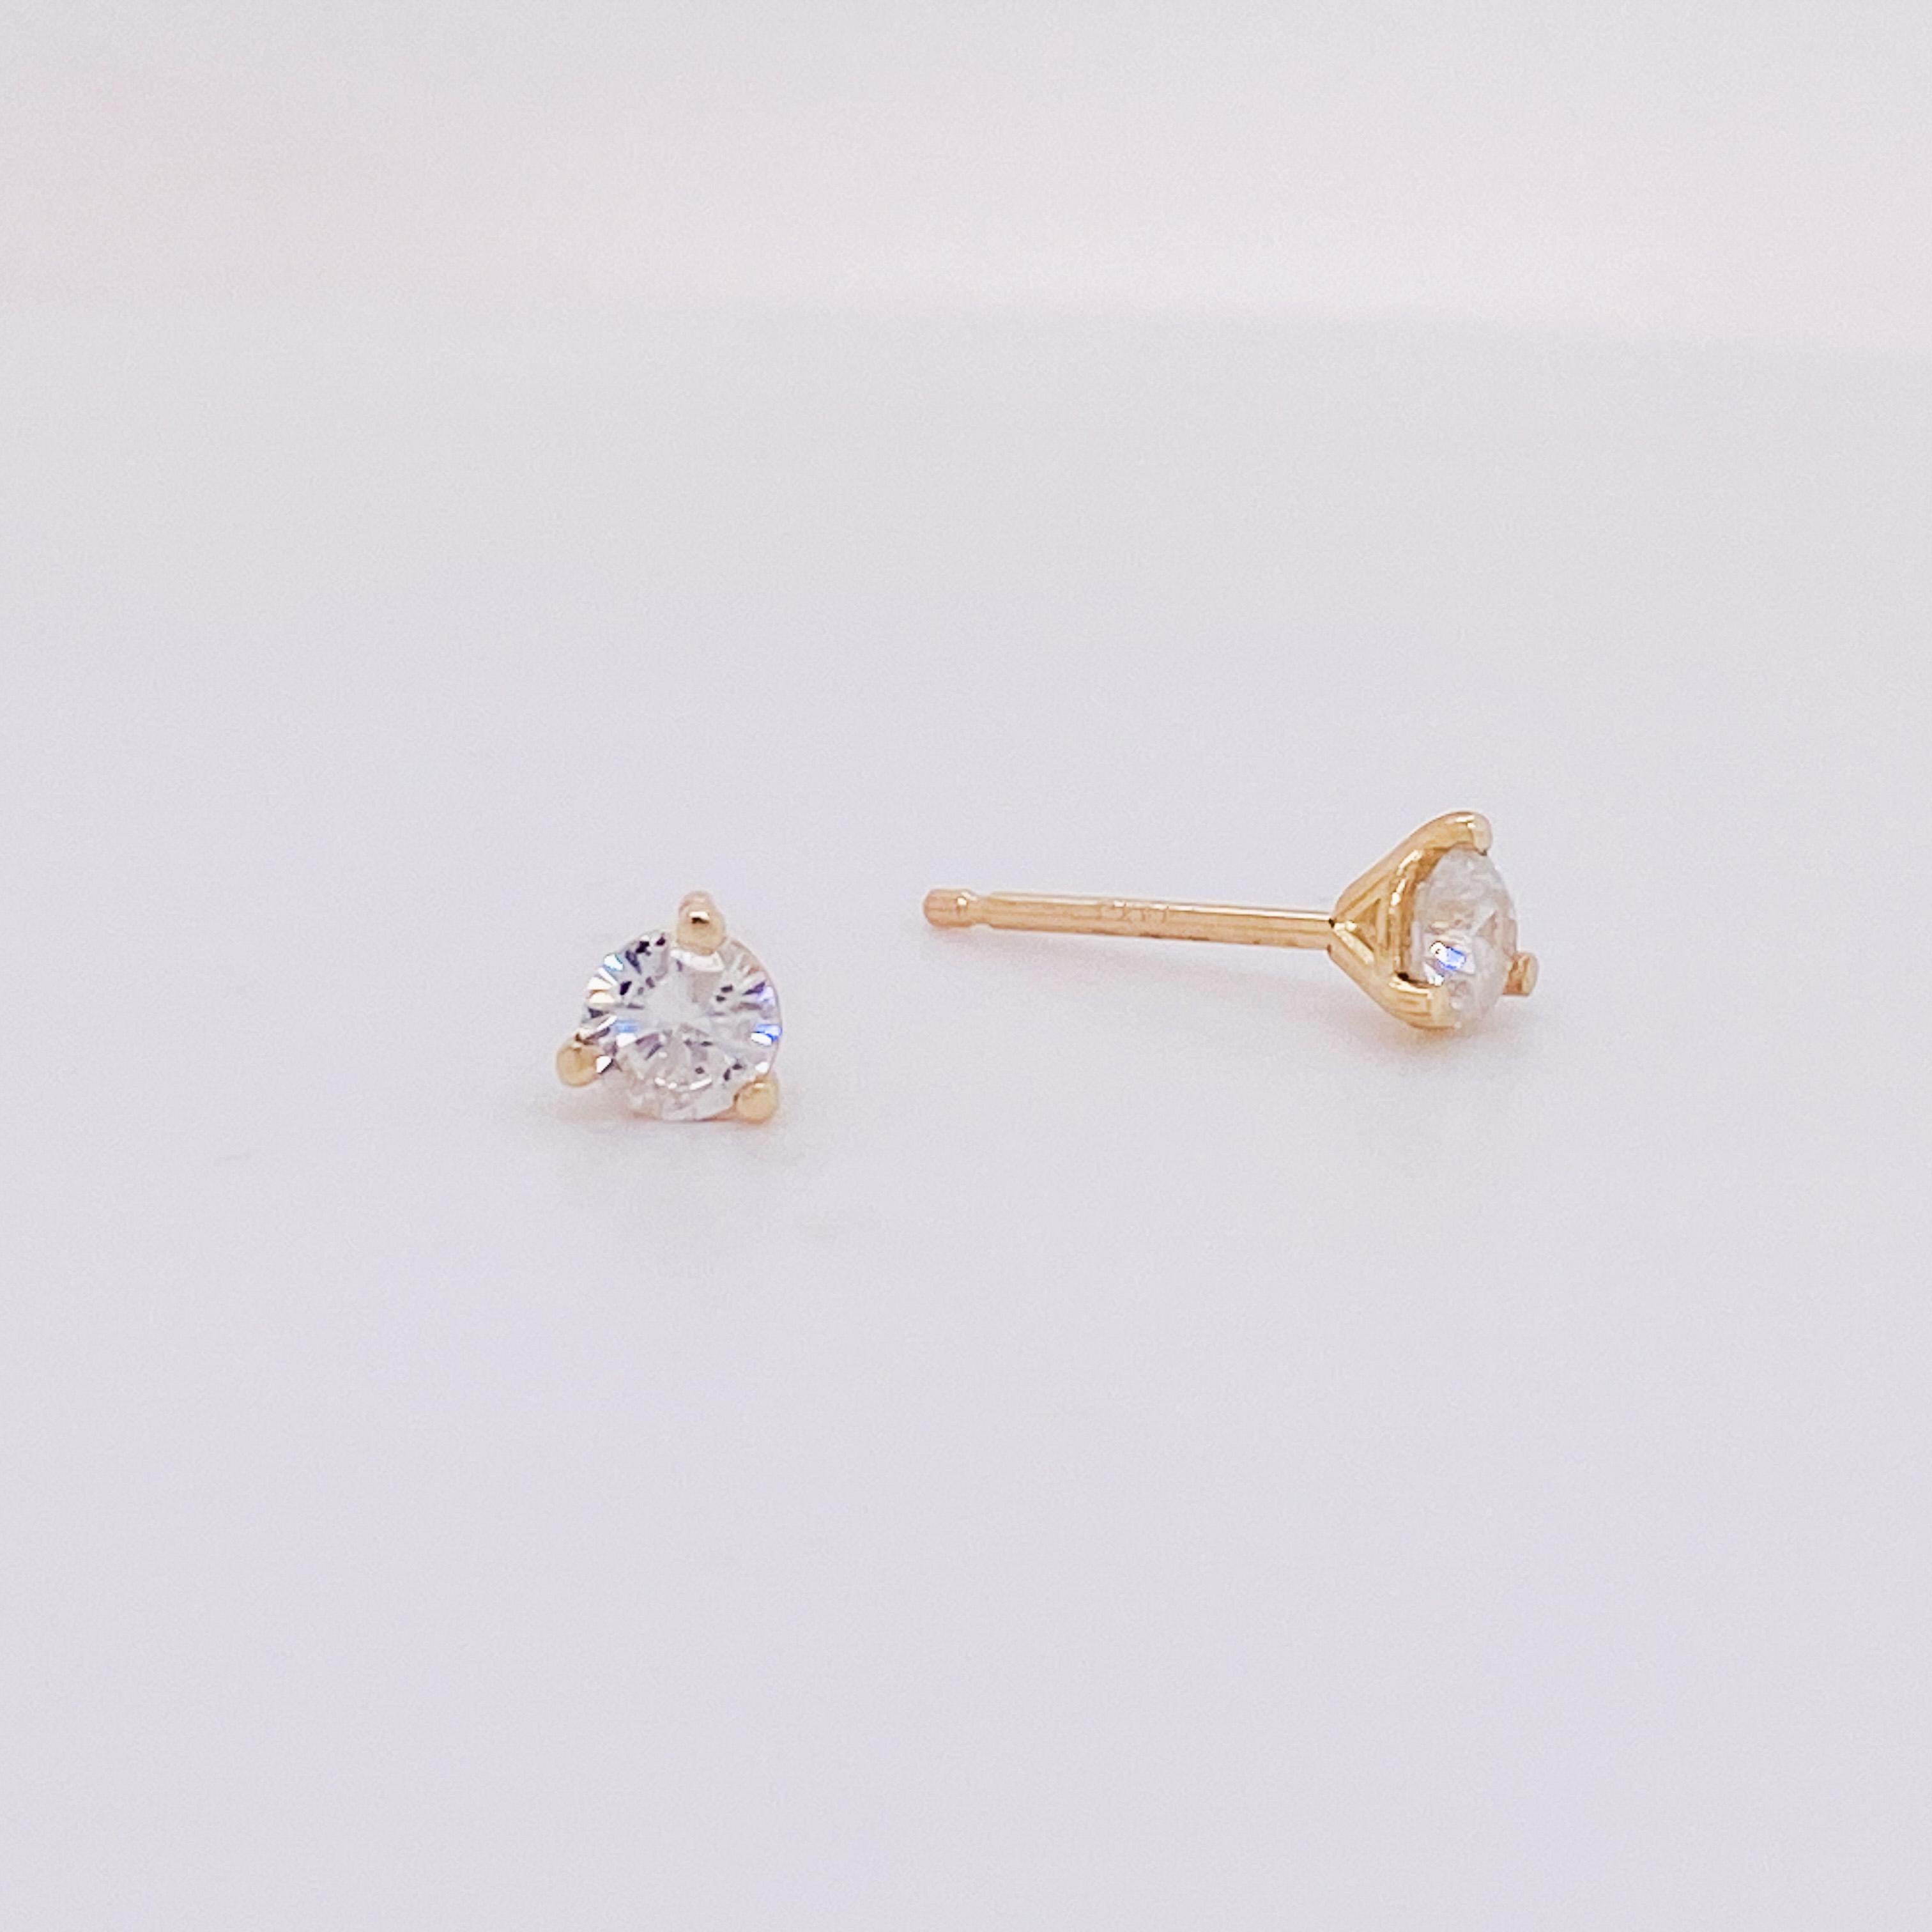 Contemporary Diamond Martini Stud Earrings 1/4 CT TW in 14K Yellow Gold, .25 Accent Stack Lv For Sale